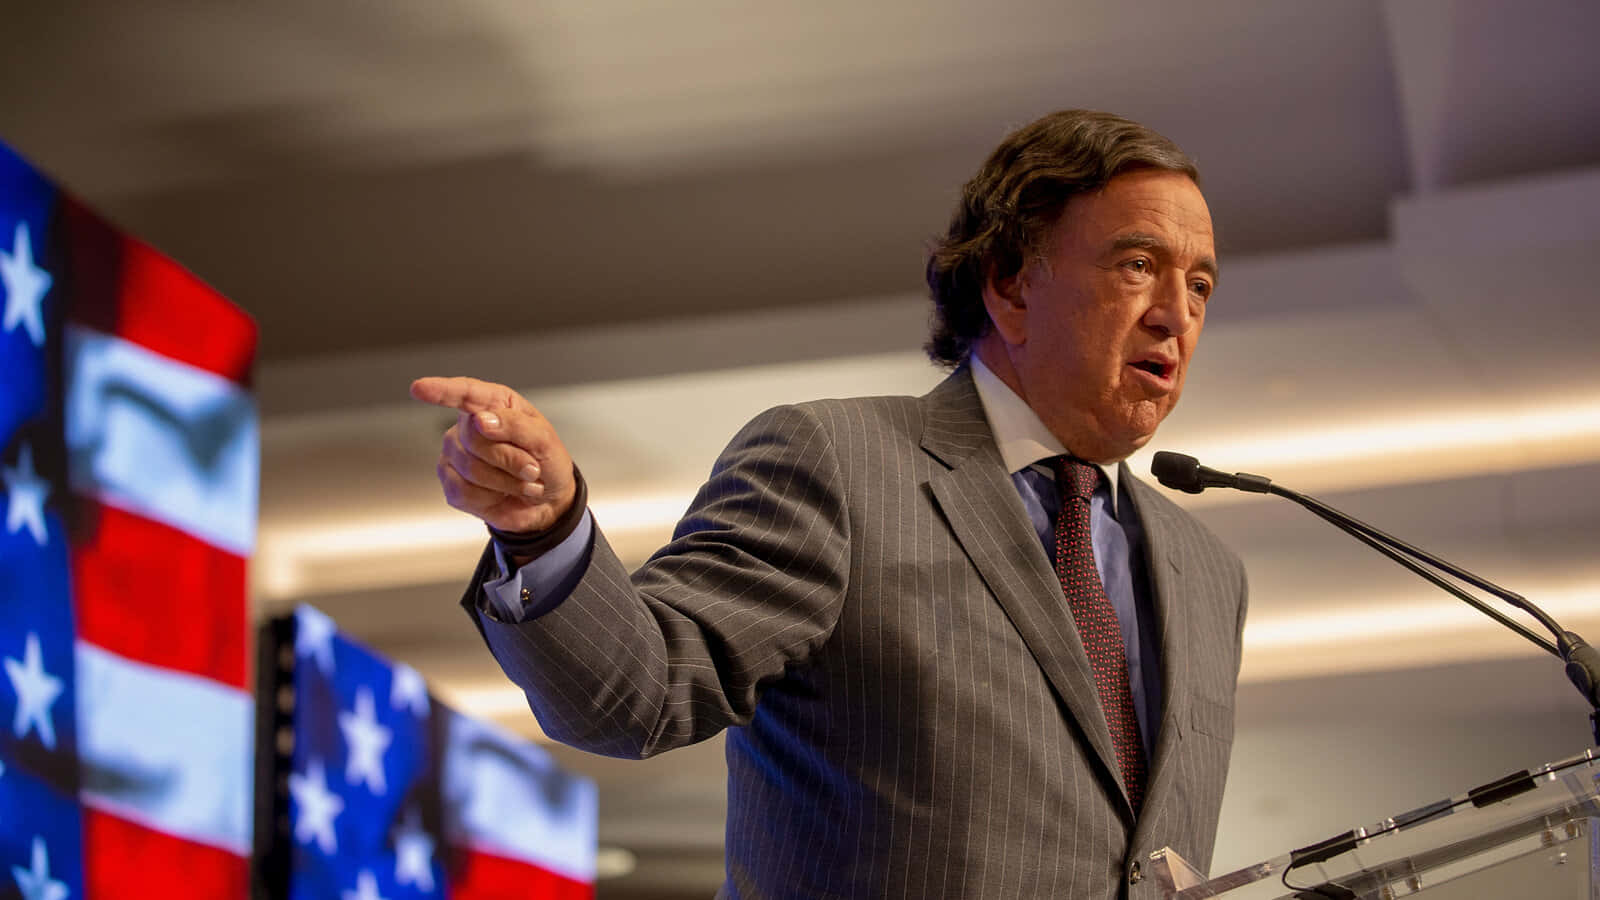 Bill Richardson Pointing during a Press Briefing Wallpaper